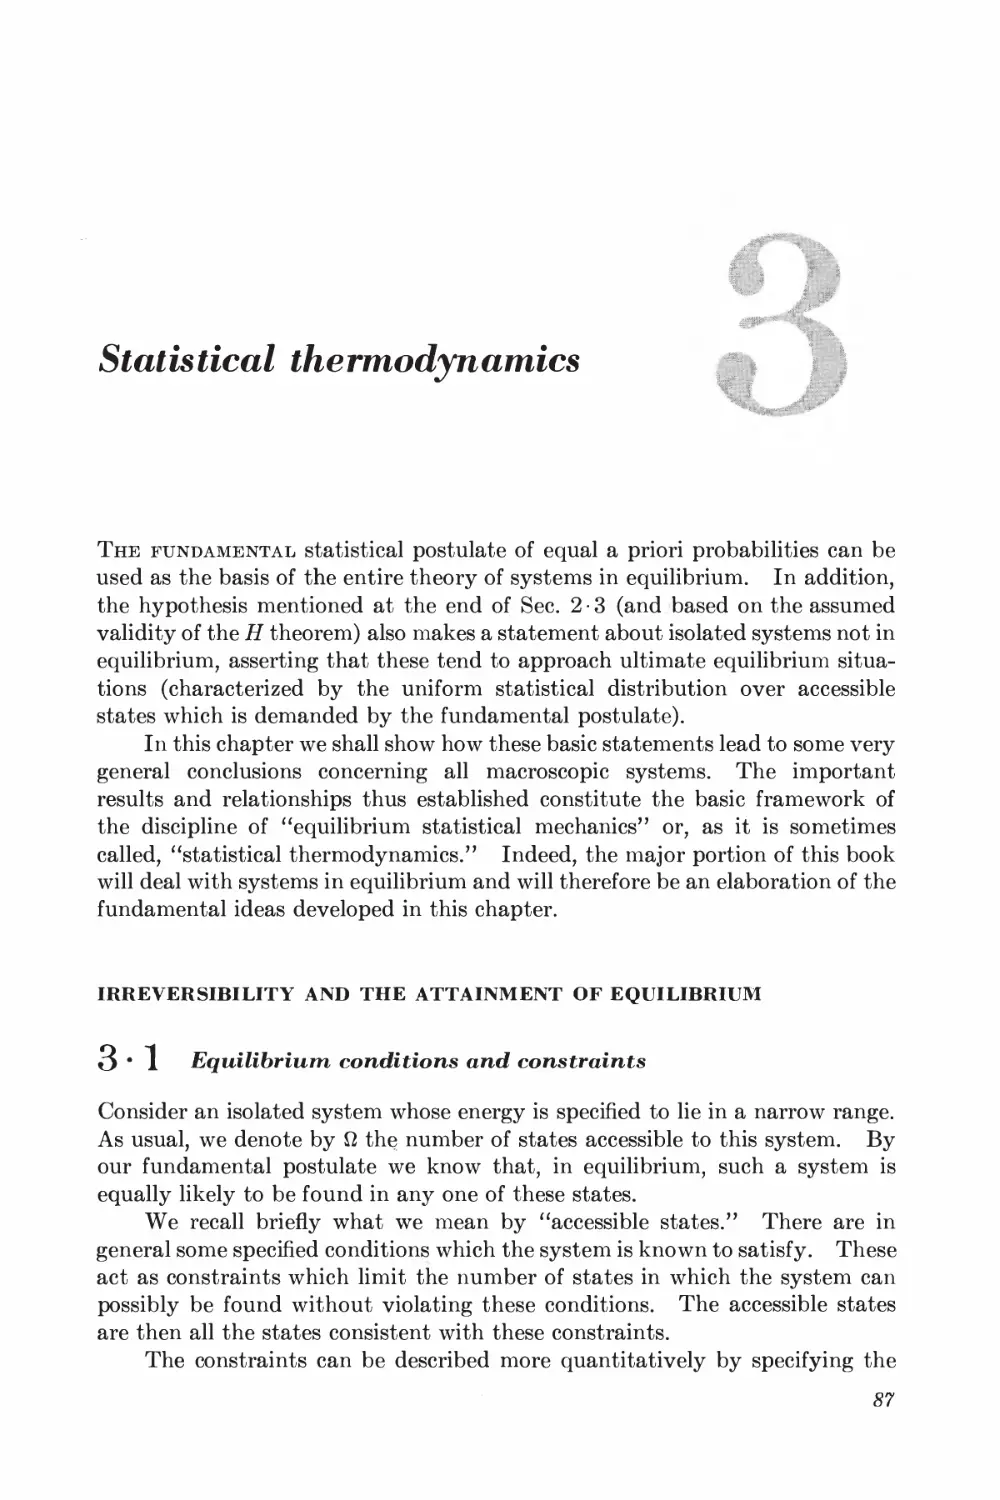 Chapter 3: Statistical Thermodynamics